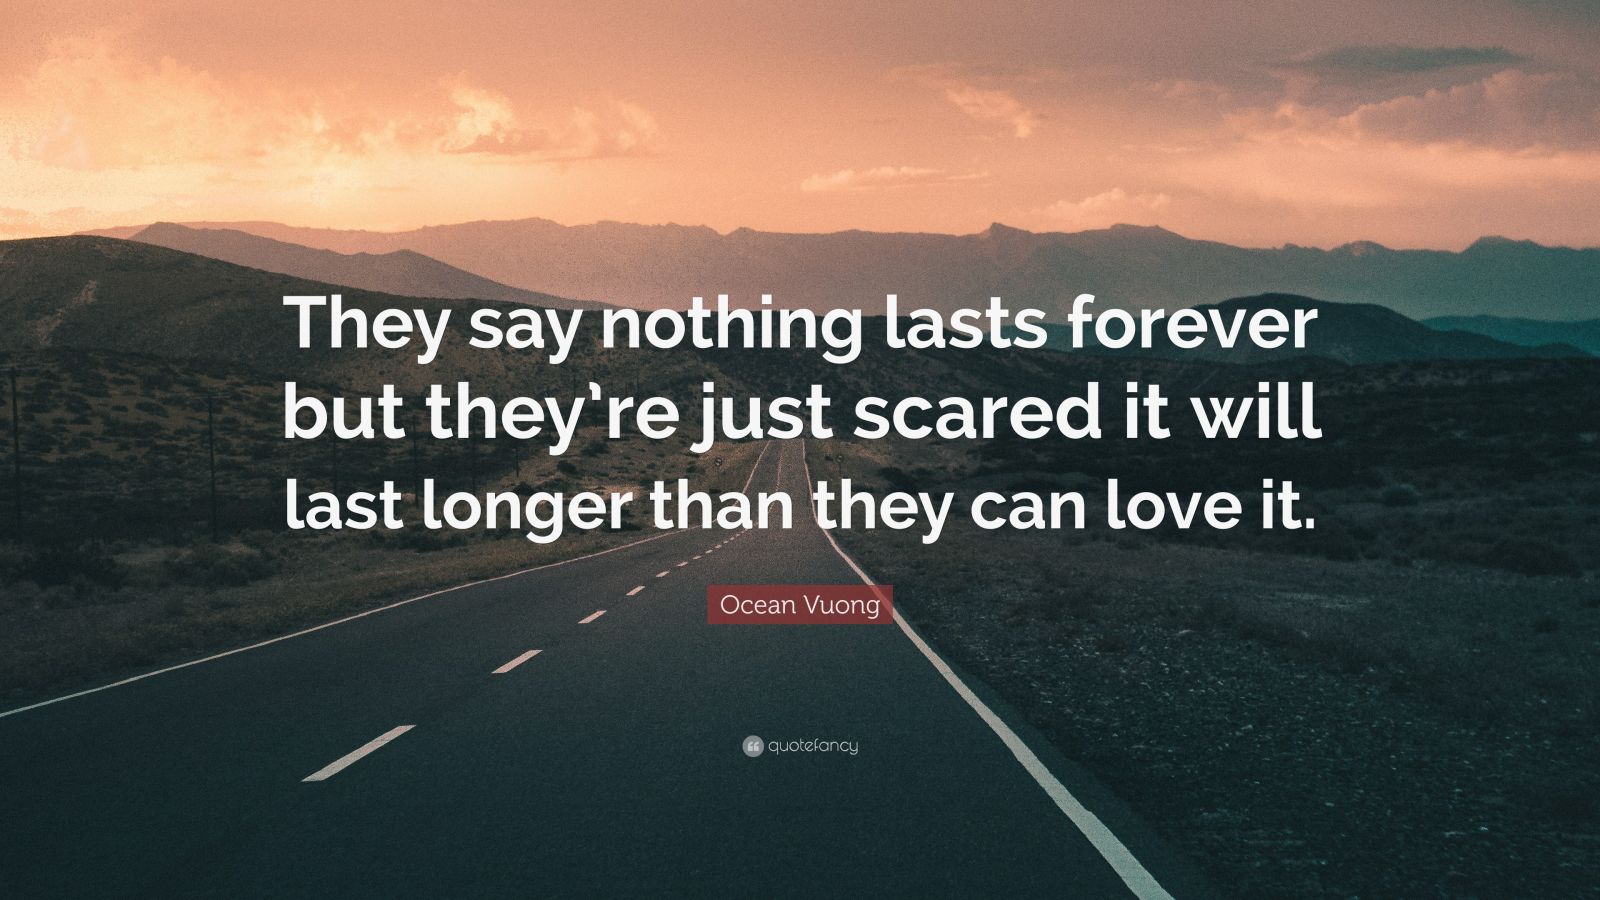 Ocean Vuong Quote: "They say nothing lasts forever but they're just scared it will last longer ...